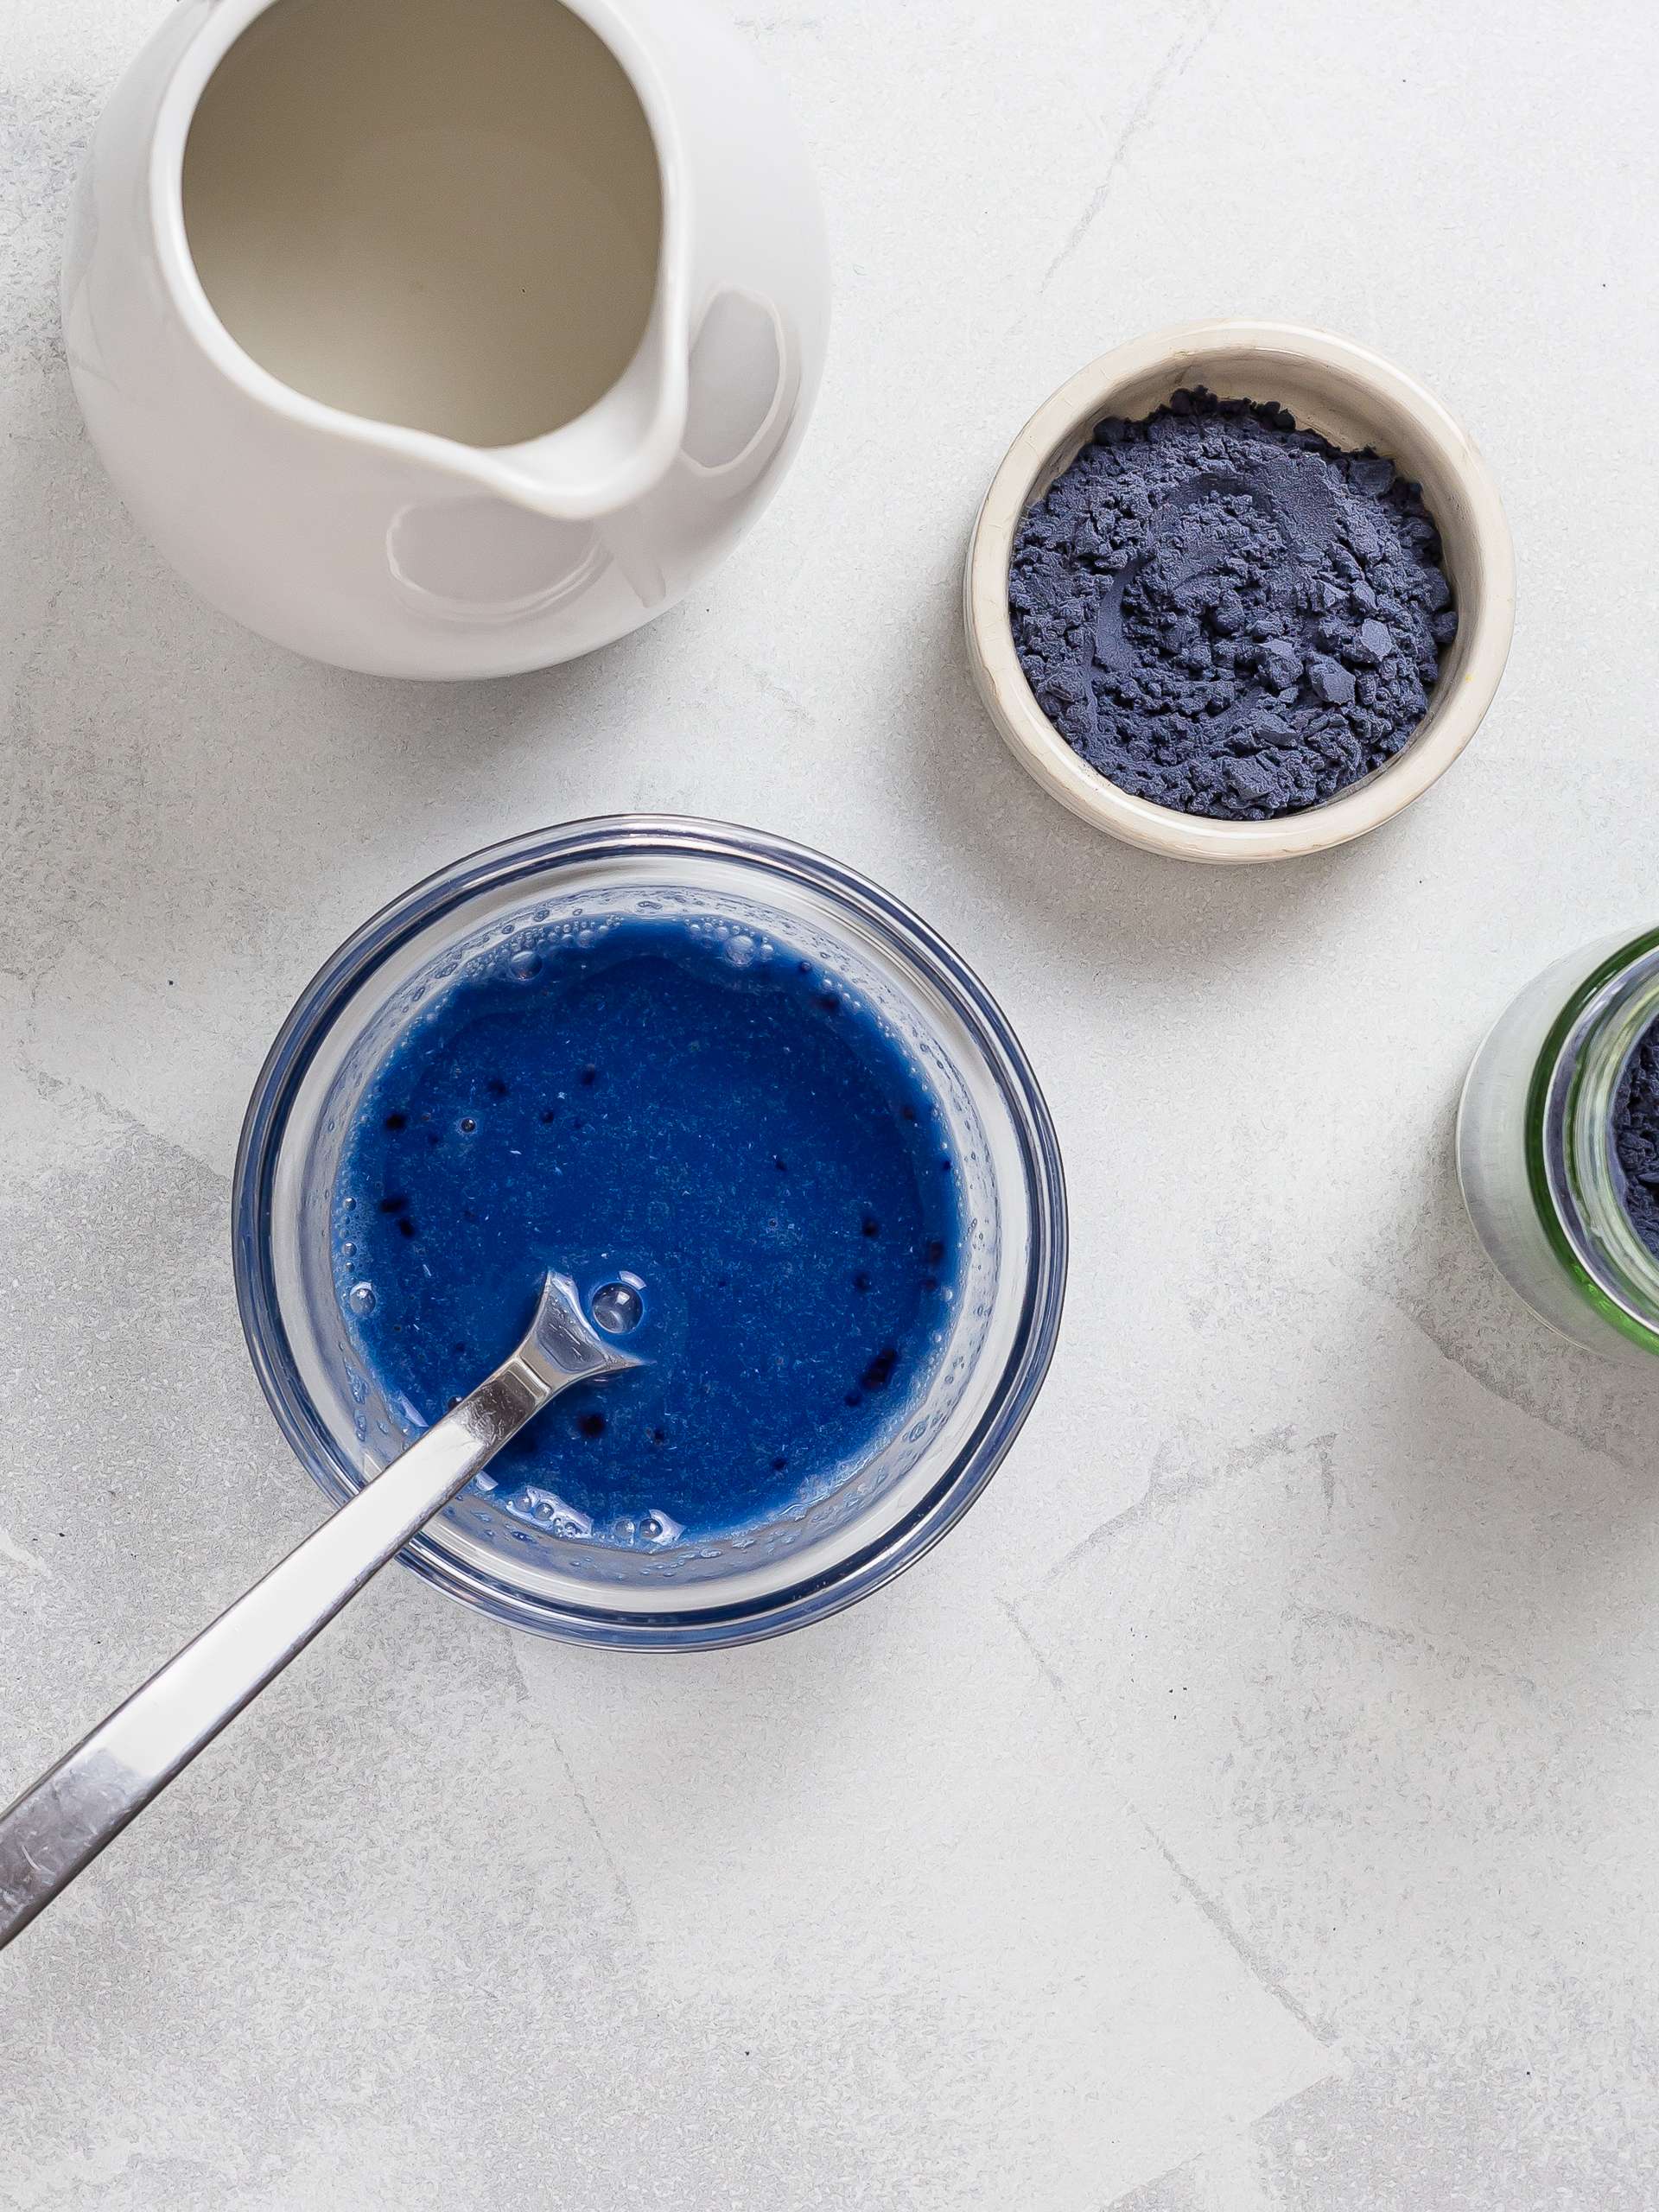 butterfly pea powder mixed with a little milk